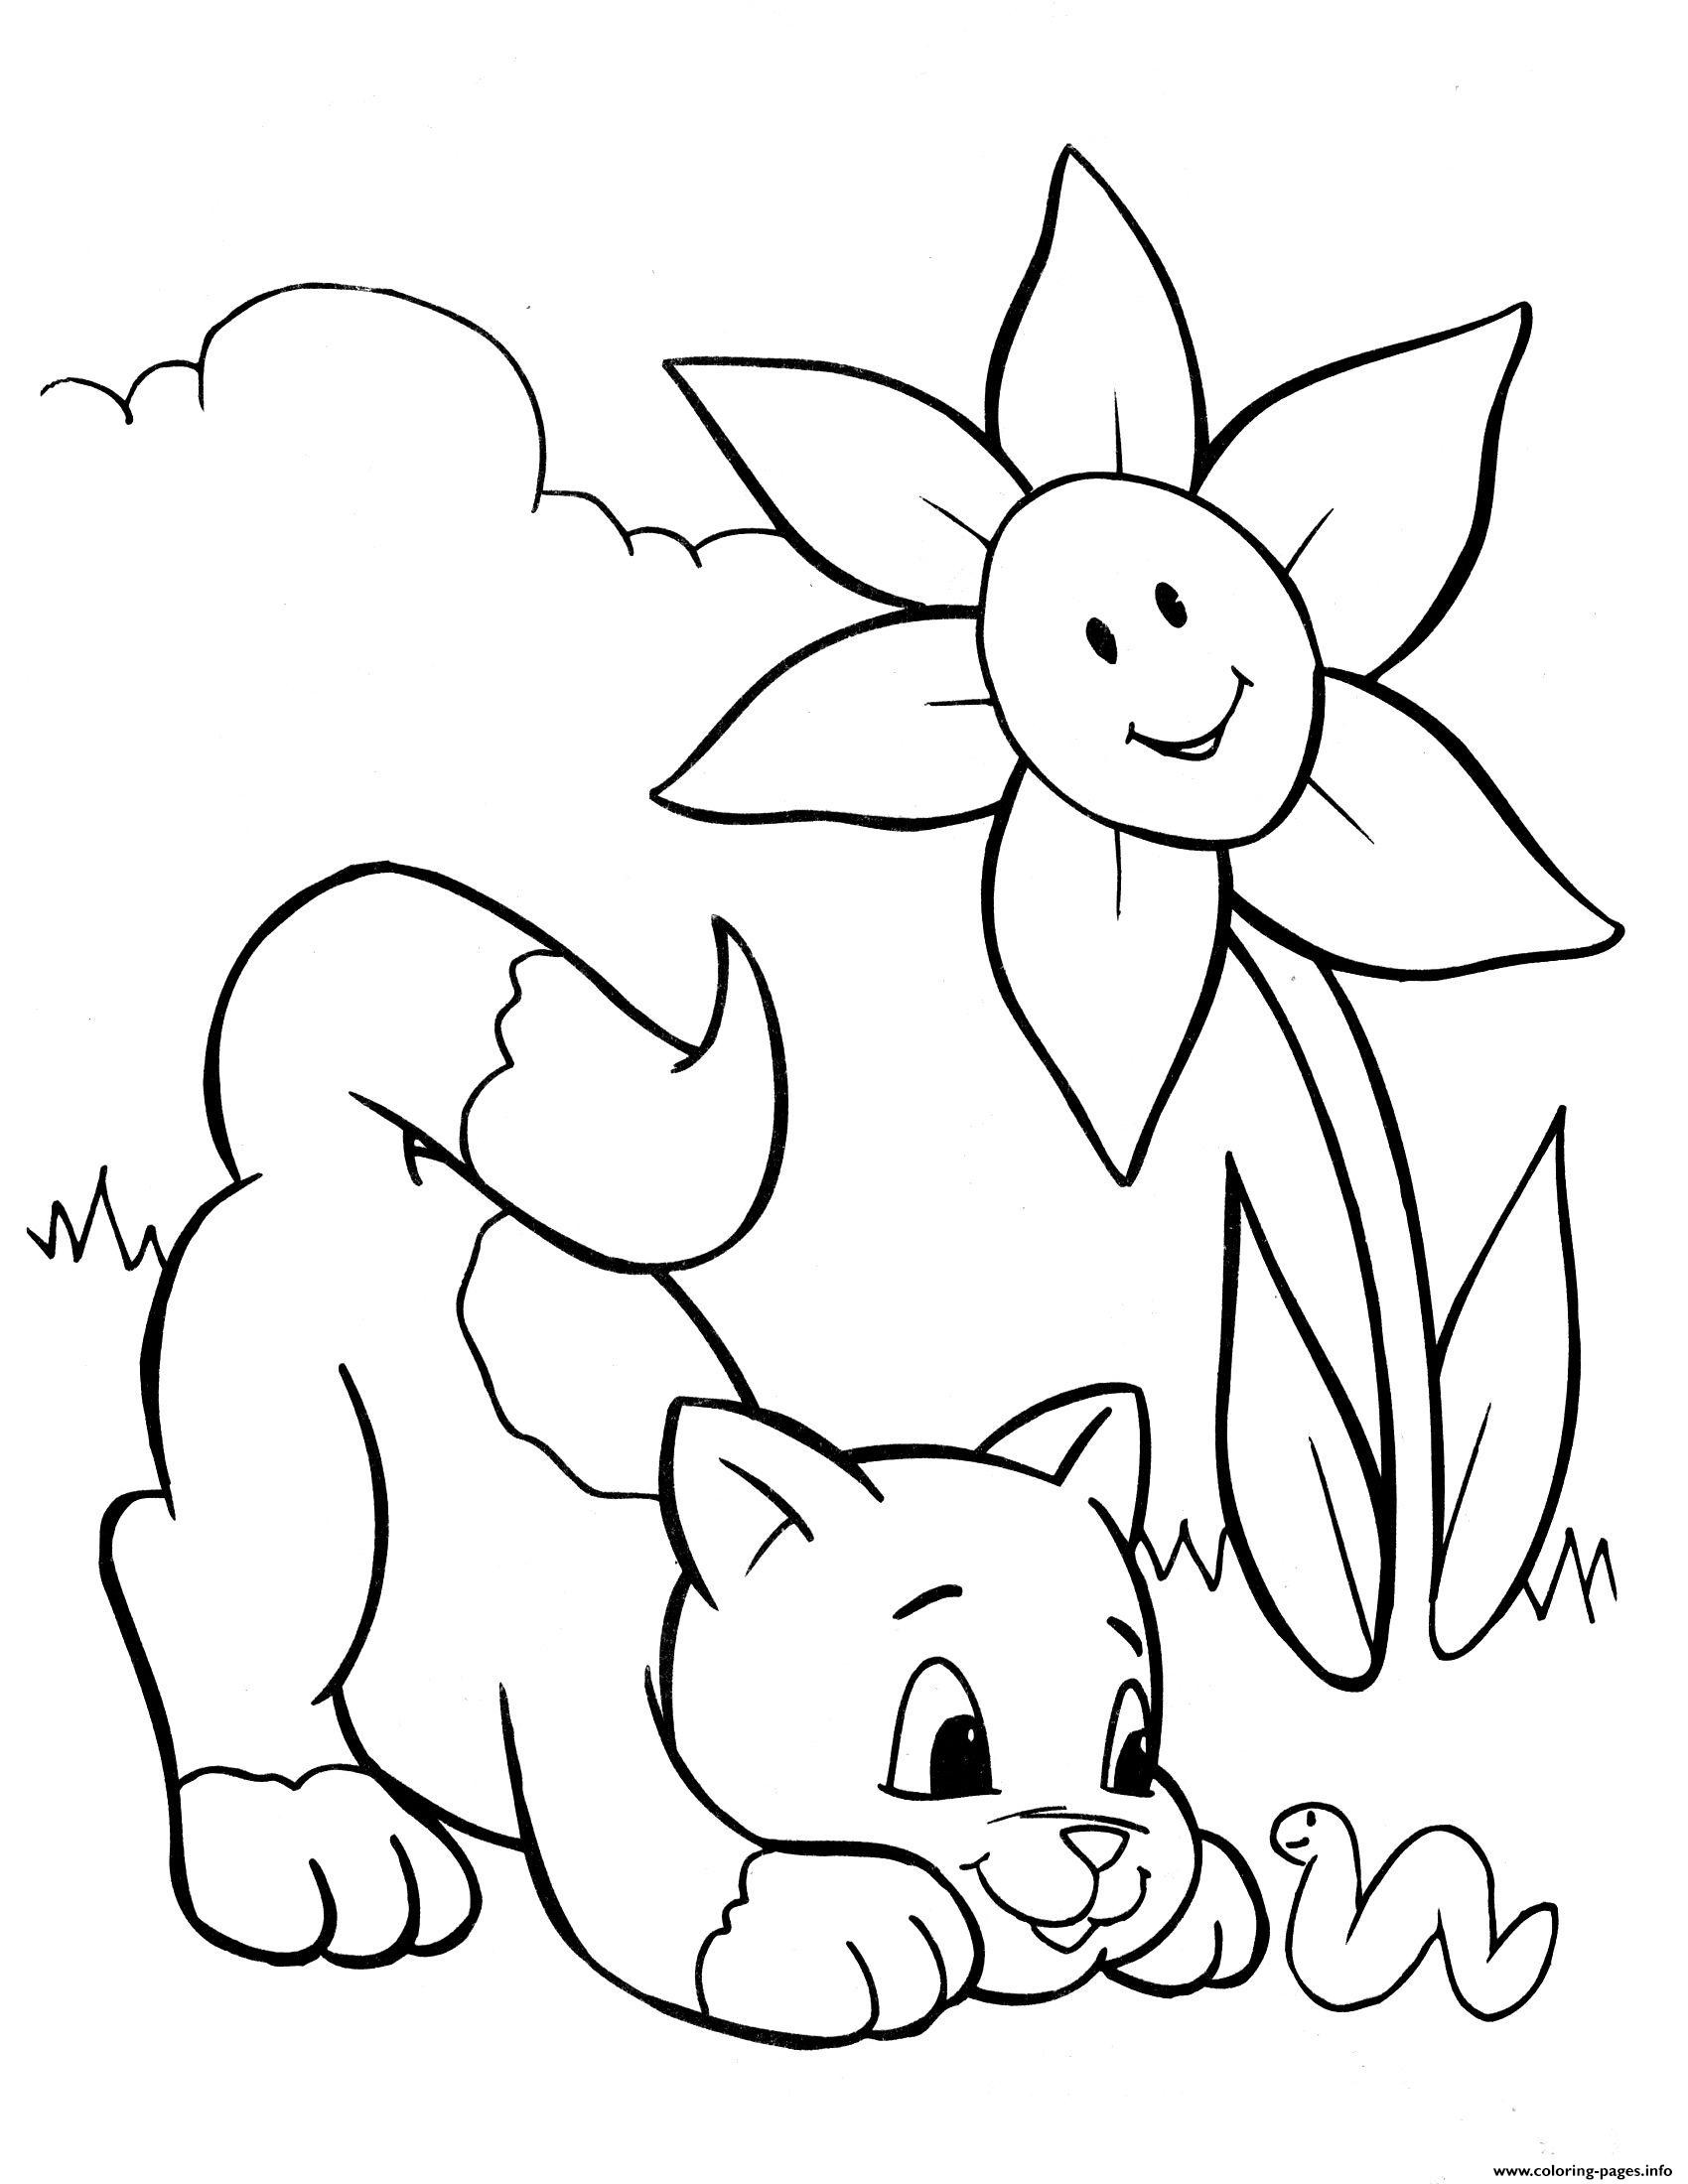 Crayola Coloring Pages For Girls
 Crayola Cat And Snake Animal Coloring Pages Printable